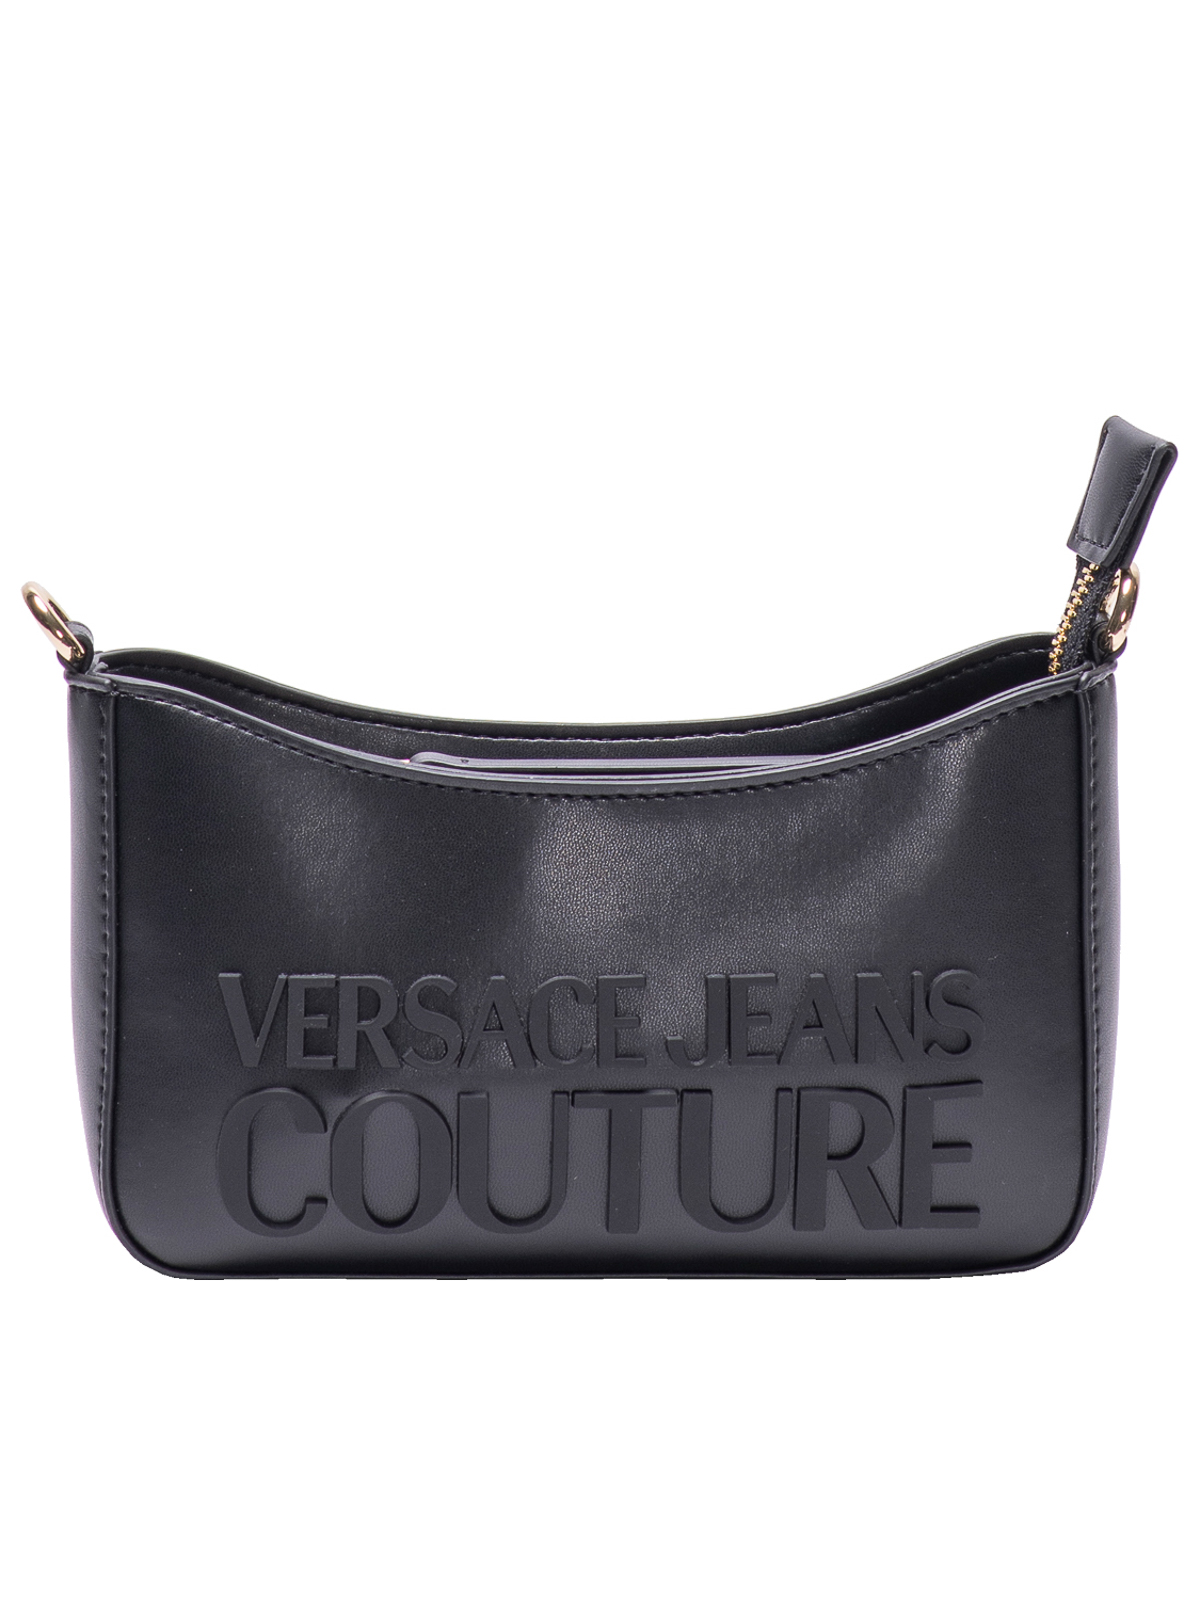 Versace Jeans Couture Institutional Logo Bag